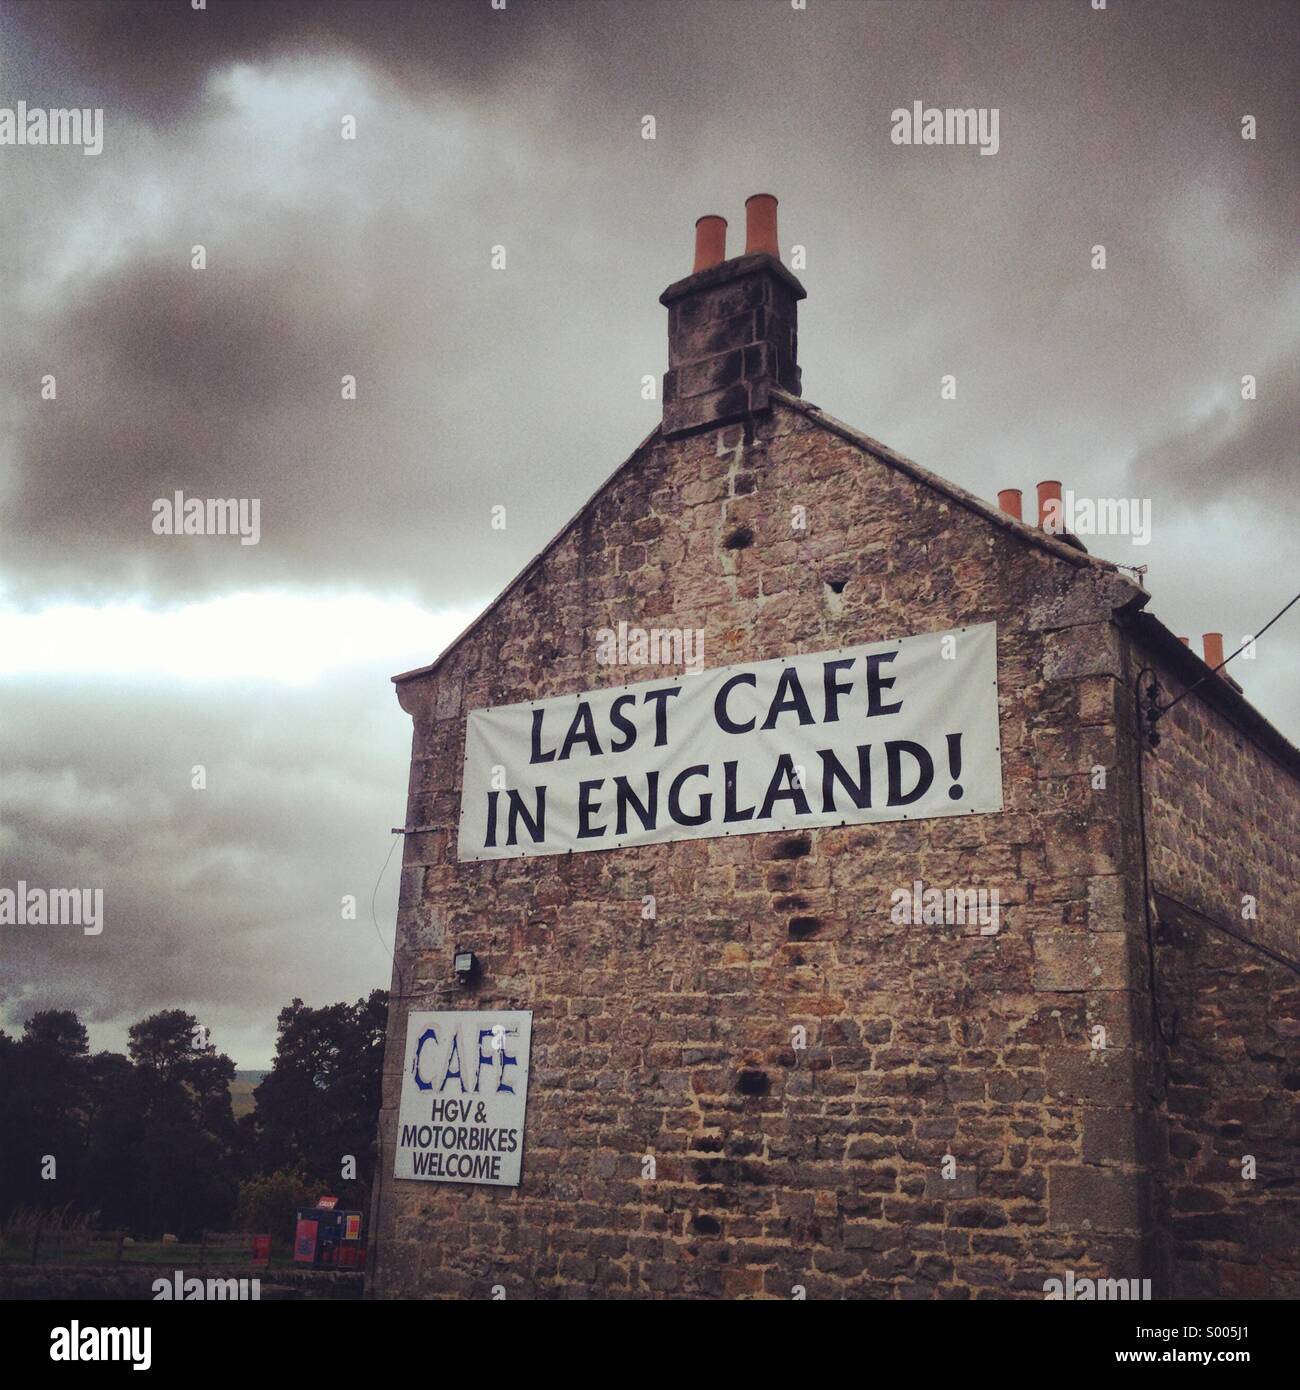 Last cafe in England! Stock Photo